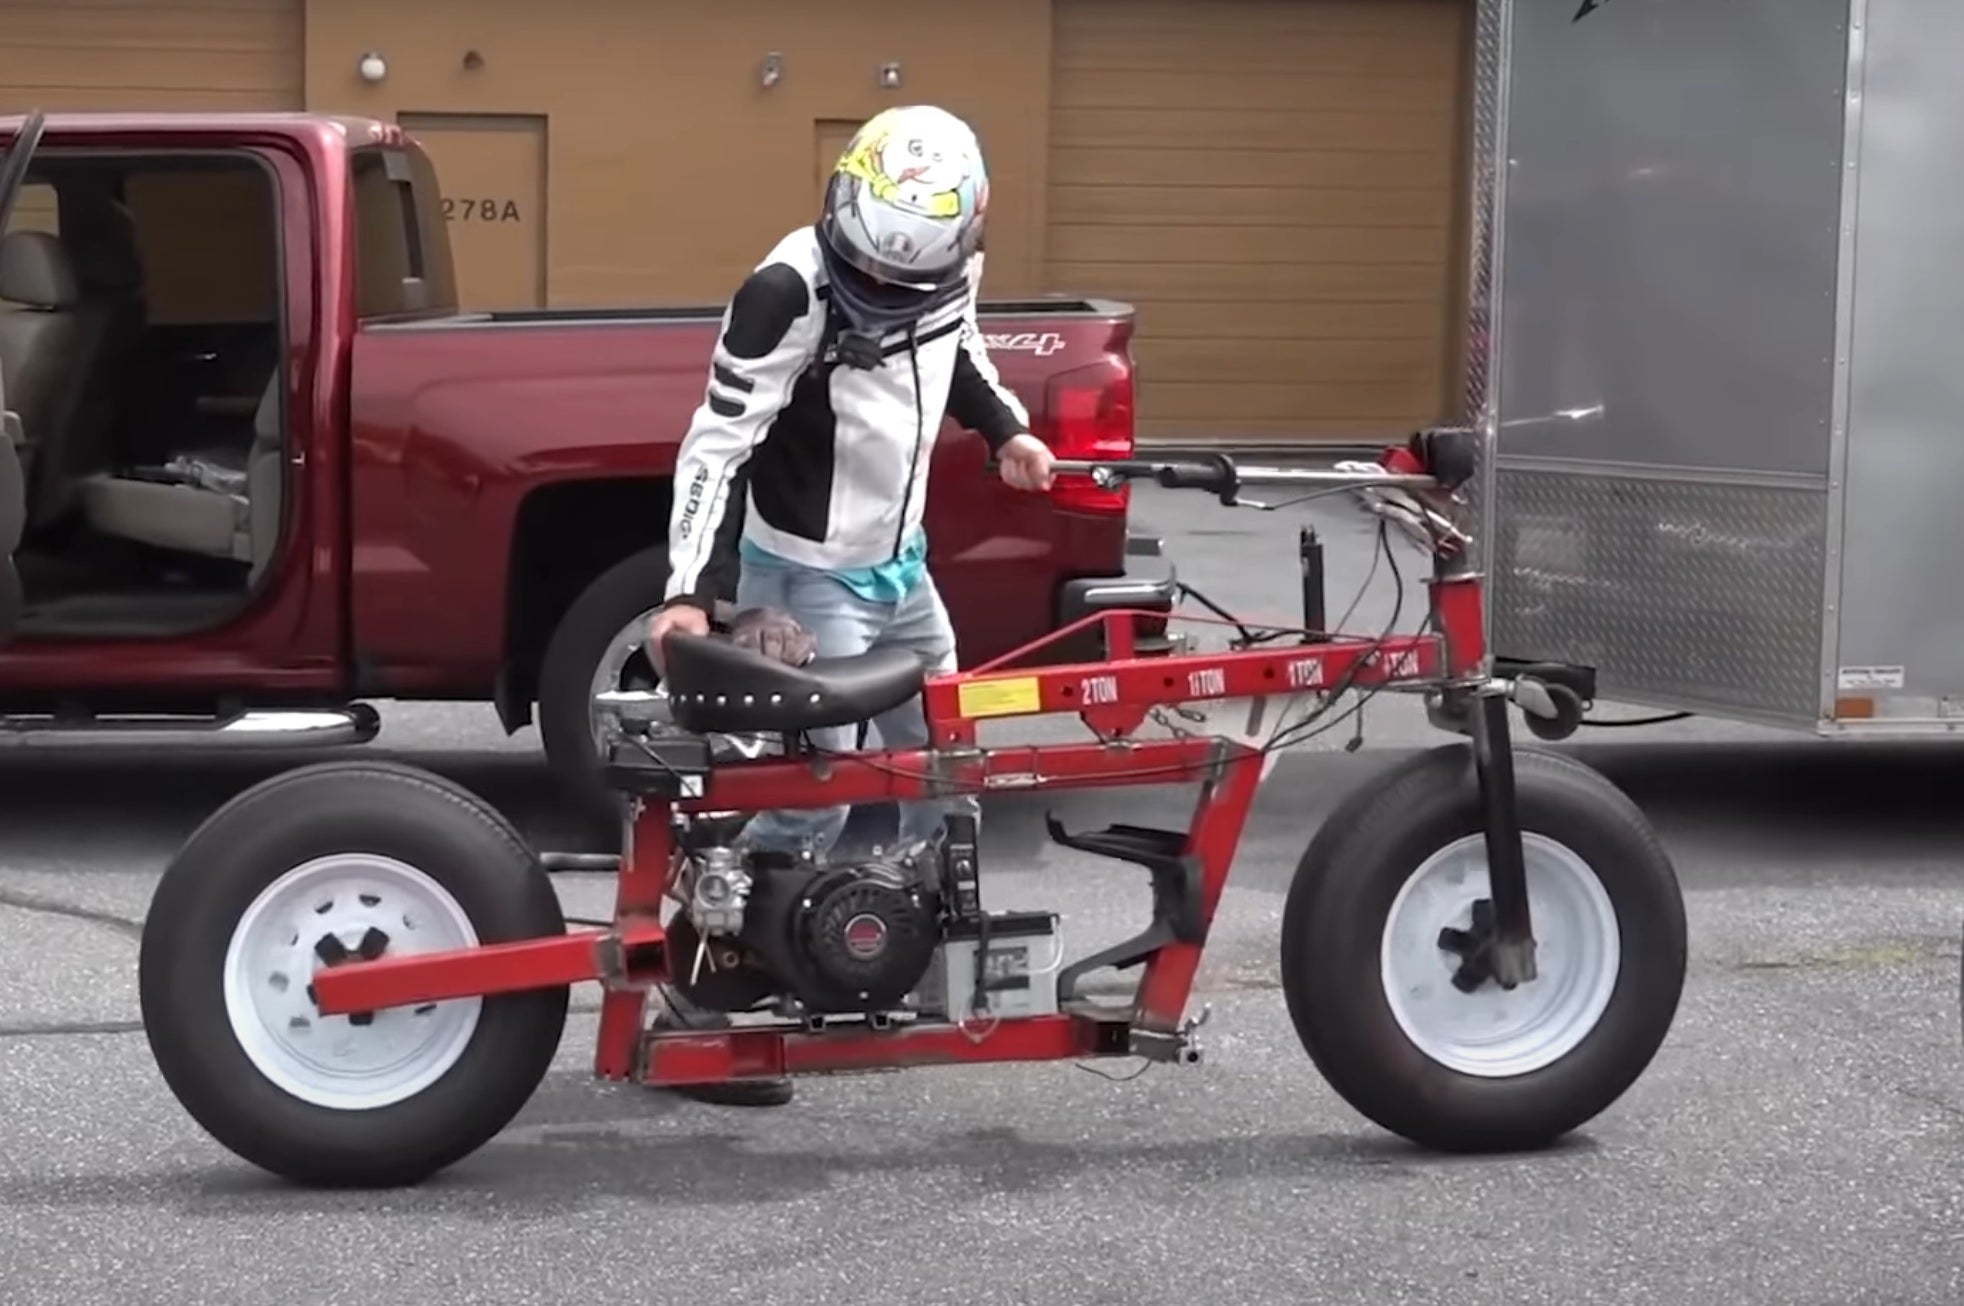 Watch This Guy Build A Bike With Harbor Freight Parts - Adventure